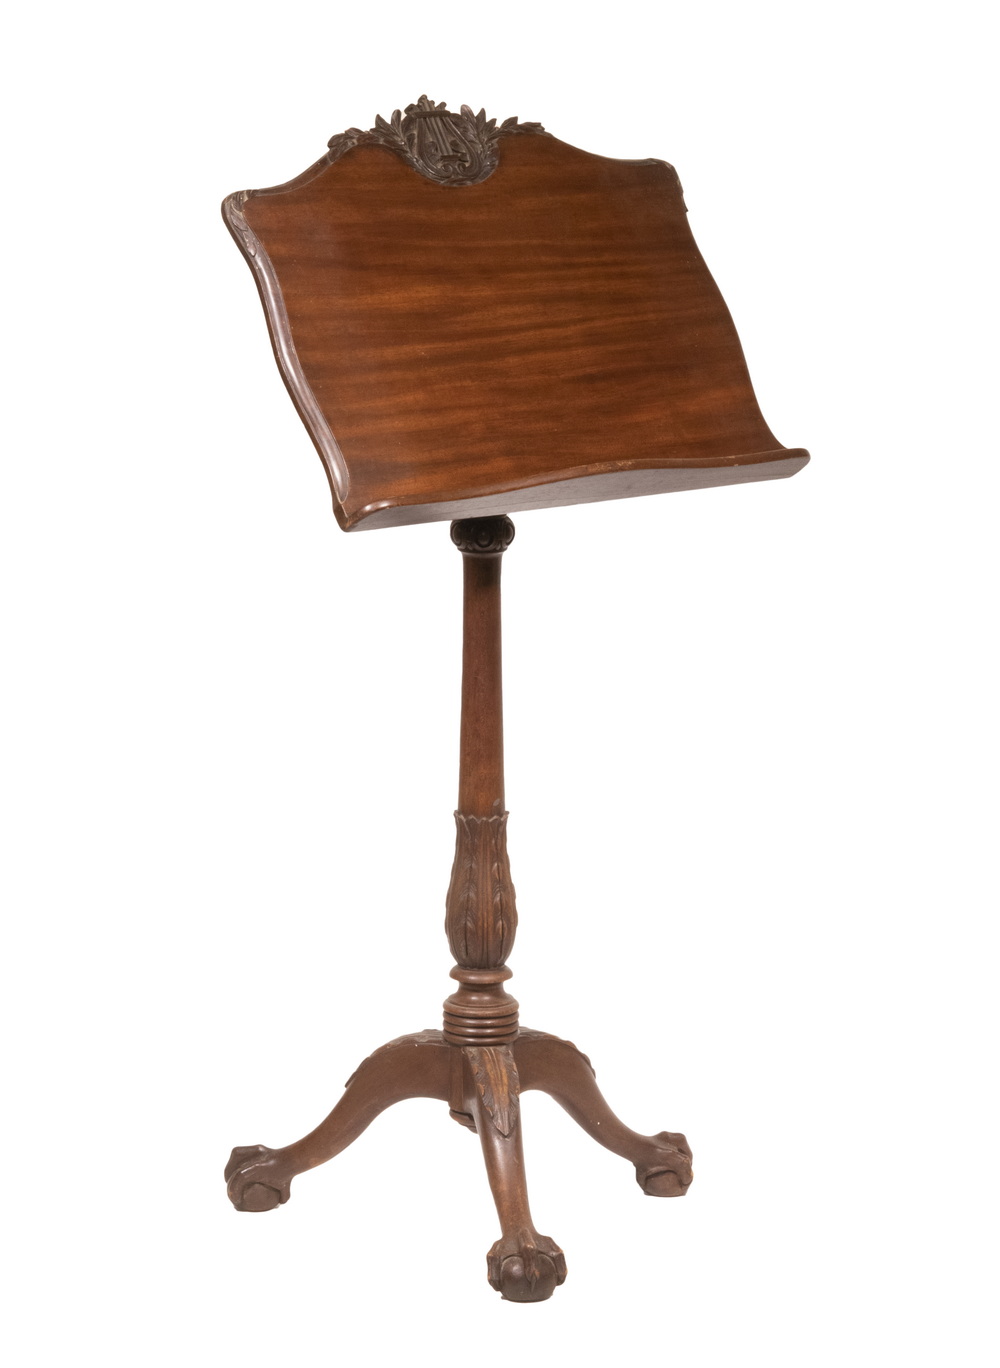 19TH C. WOODEN MUSIC STAND Chippendale